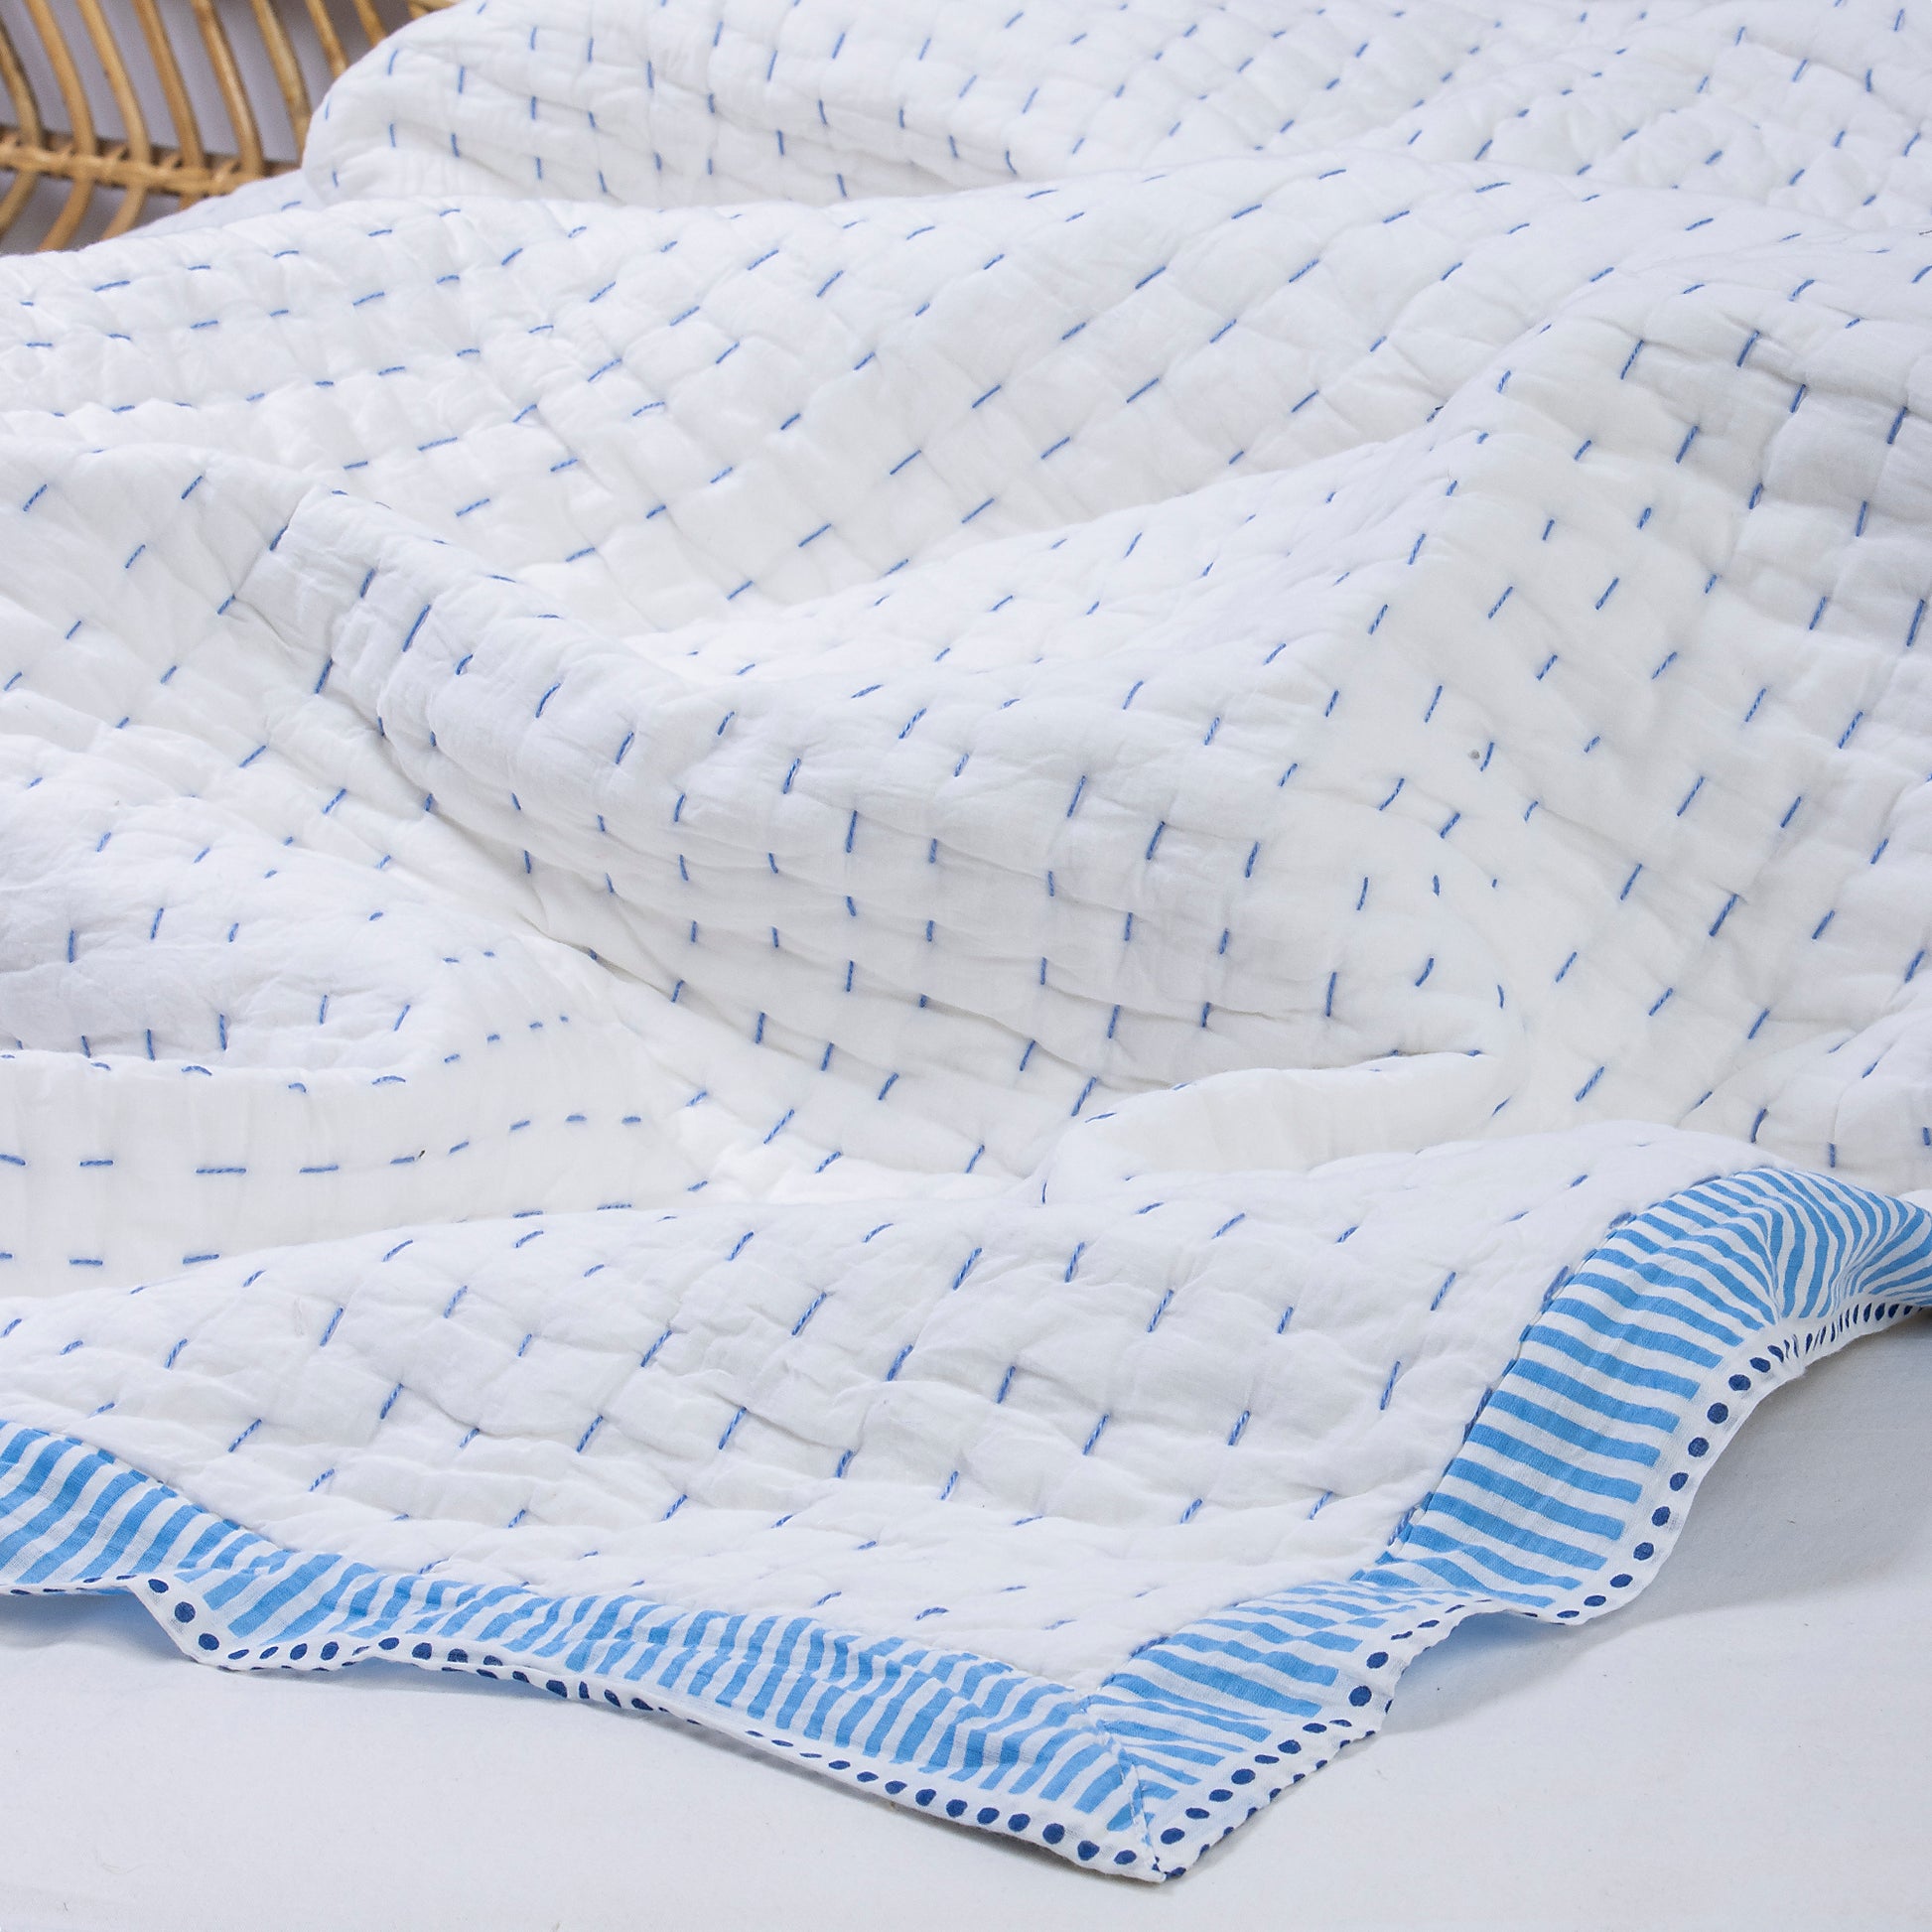 Handmade Solid White Cotton Reversible Kantha Bed Quilts